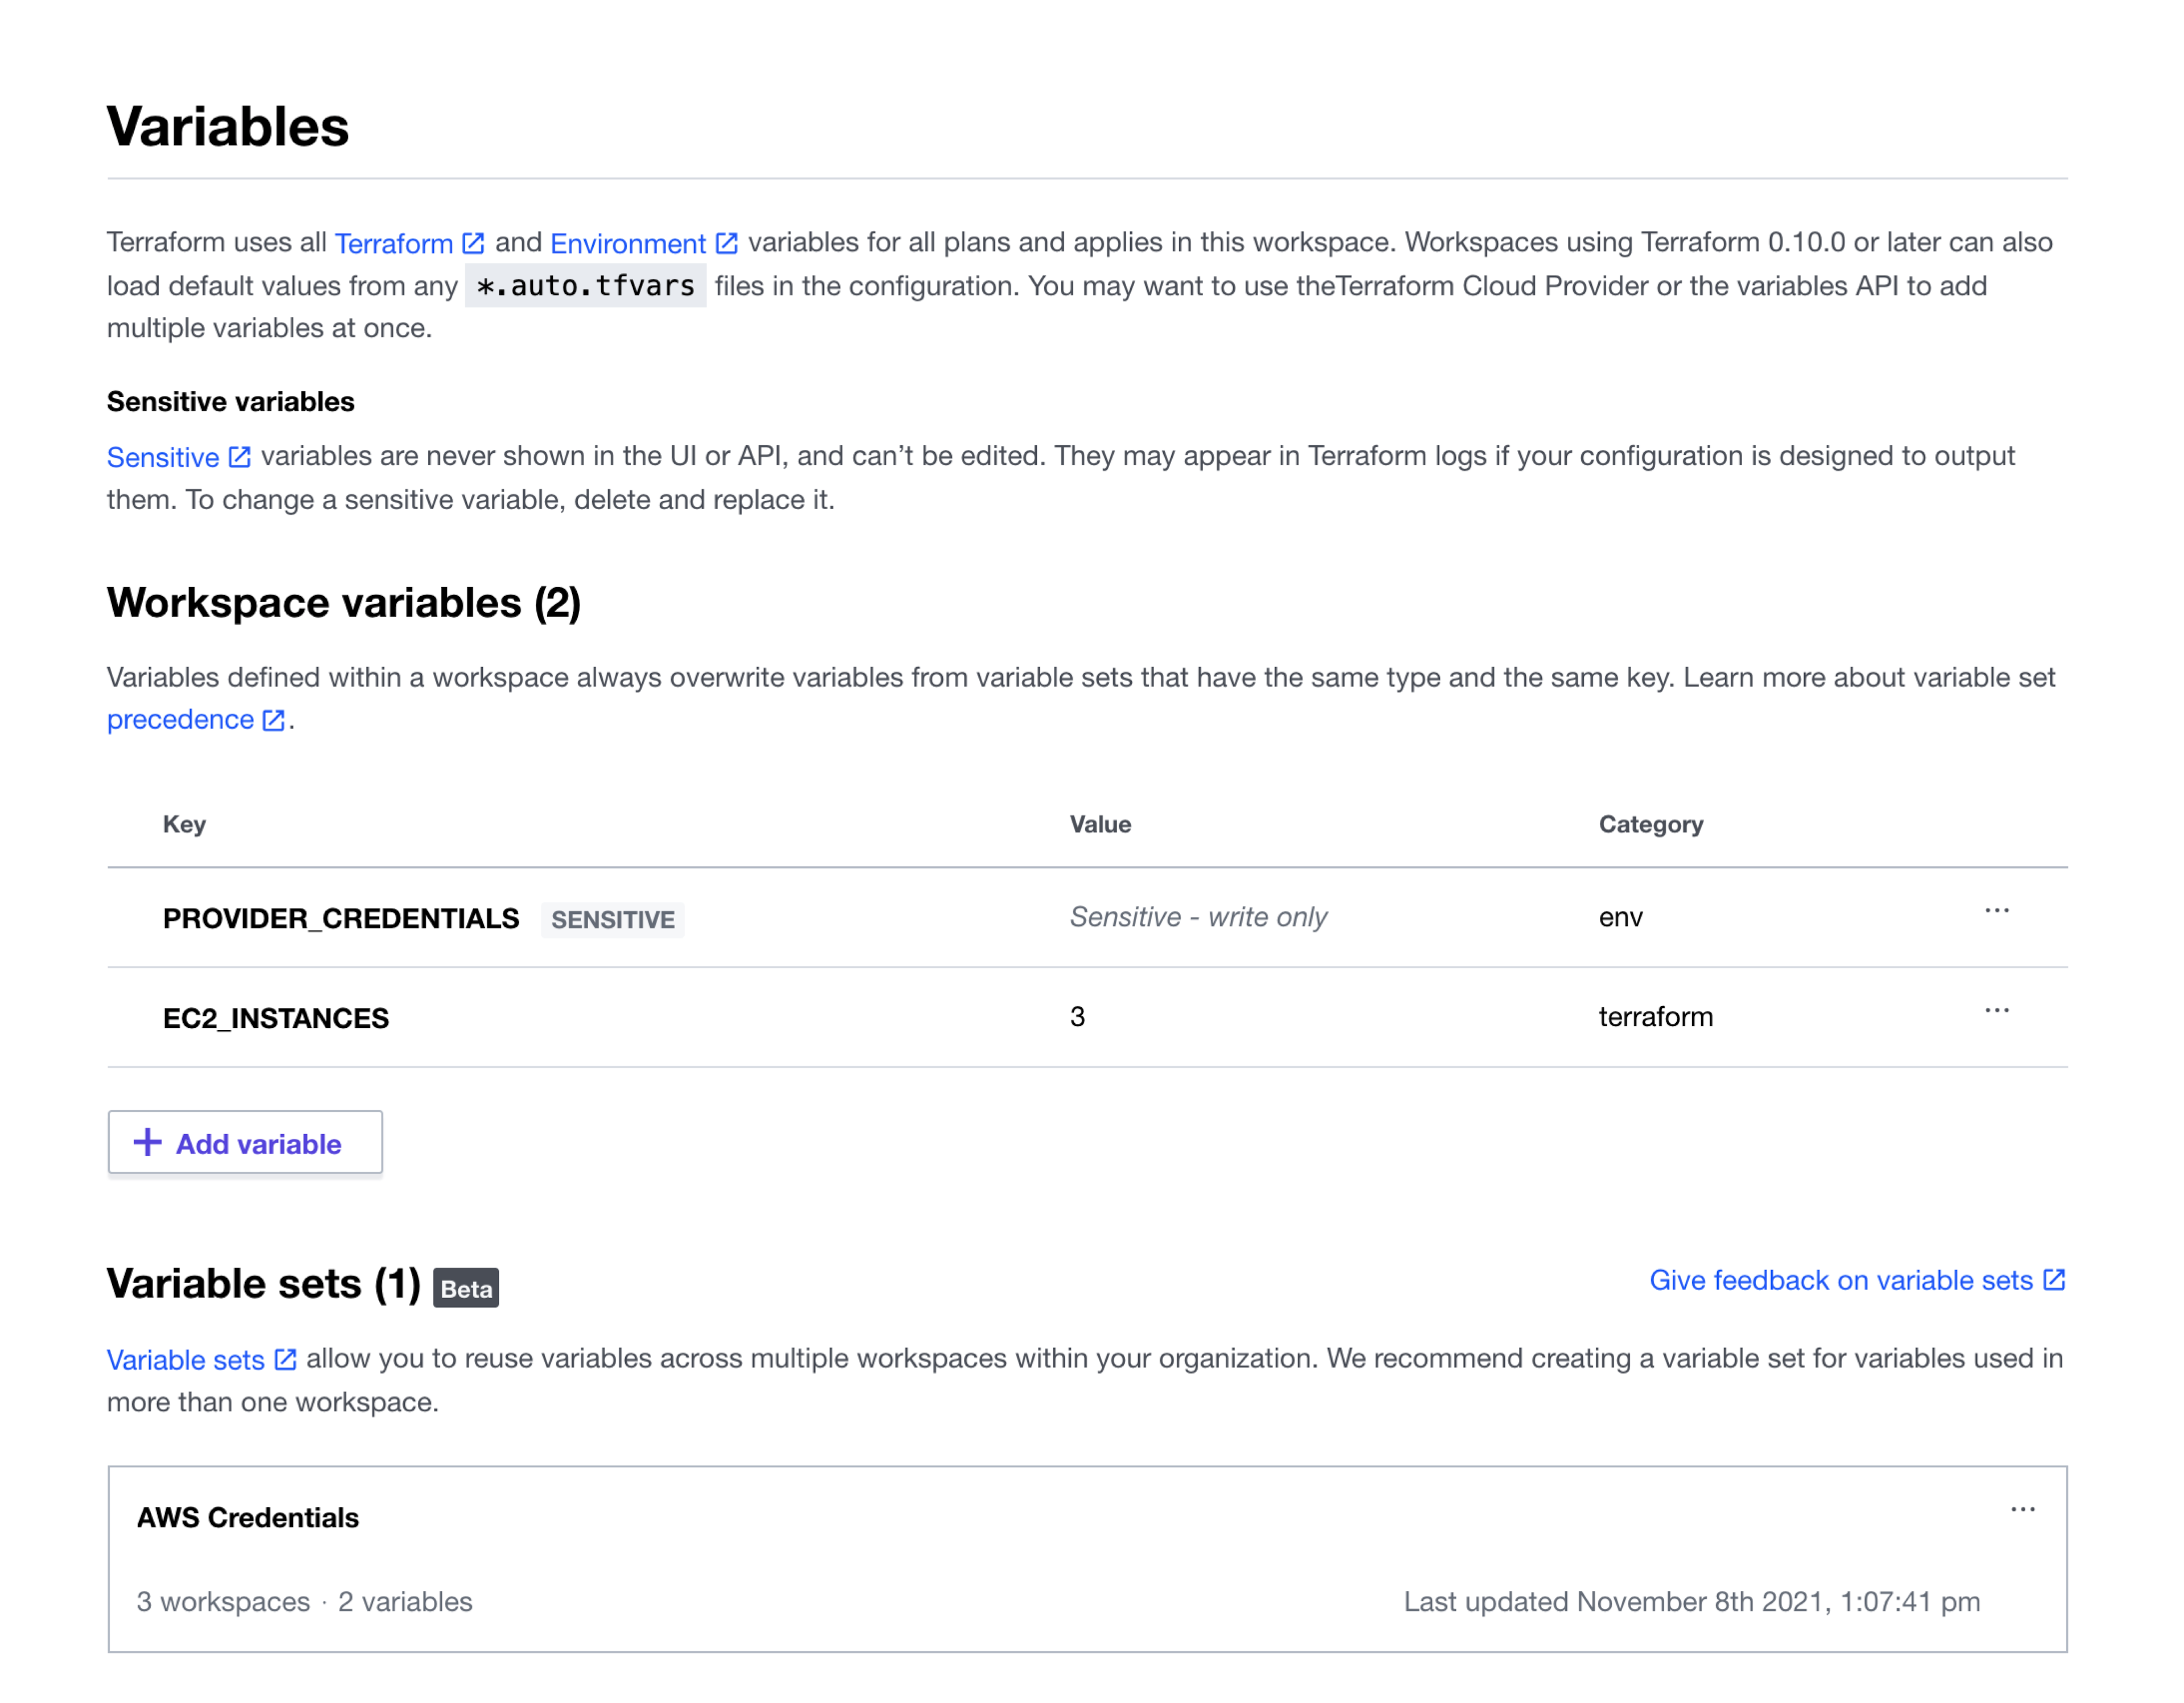 Screenshot: The variables page for a workspace